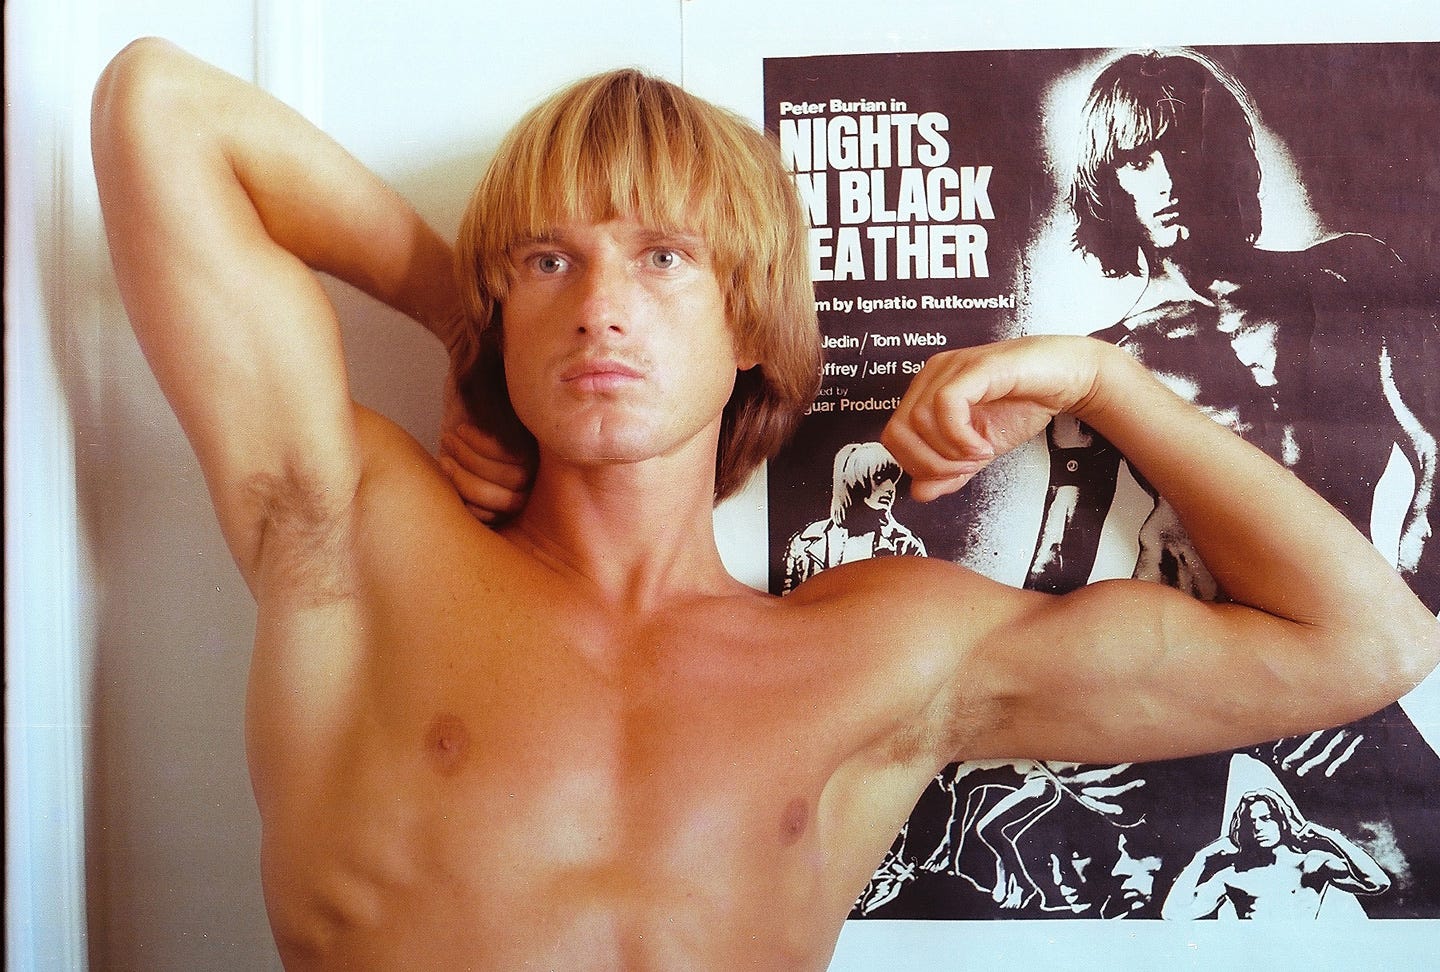 Peter Berlin poses topless next to a poster for his film "Night In Black Leather"